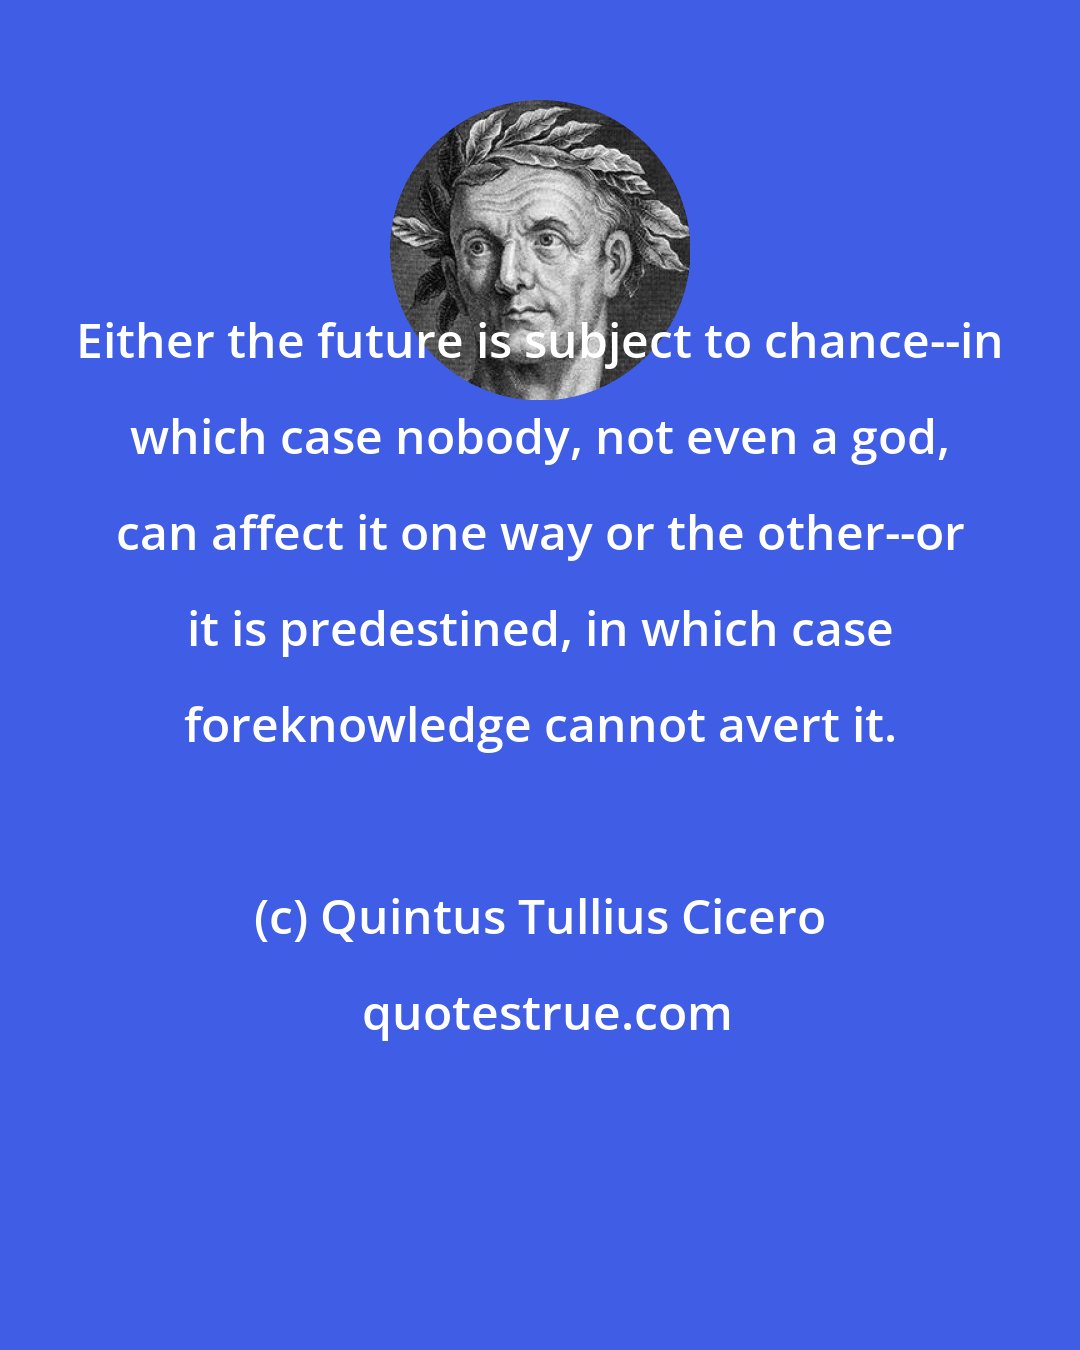 Quintus Tullius Cicero: Either the future is subject to chance--in which case nobody, not even a god, can affect it one way or the other--or it is predestined, in which case foreknowledge cannot avert it.